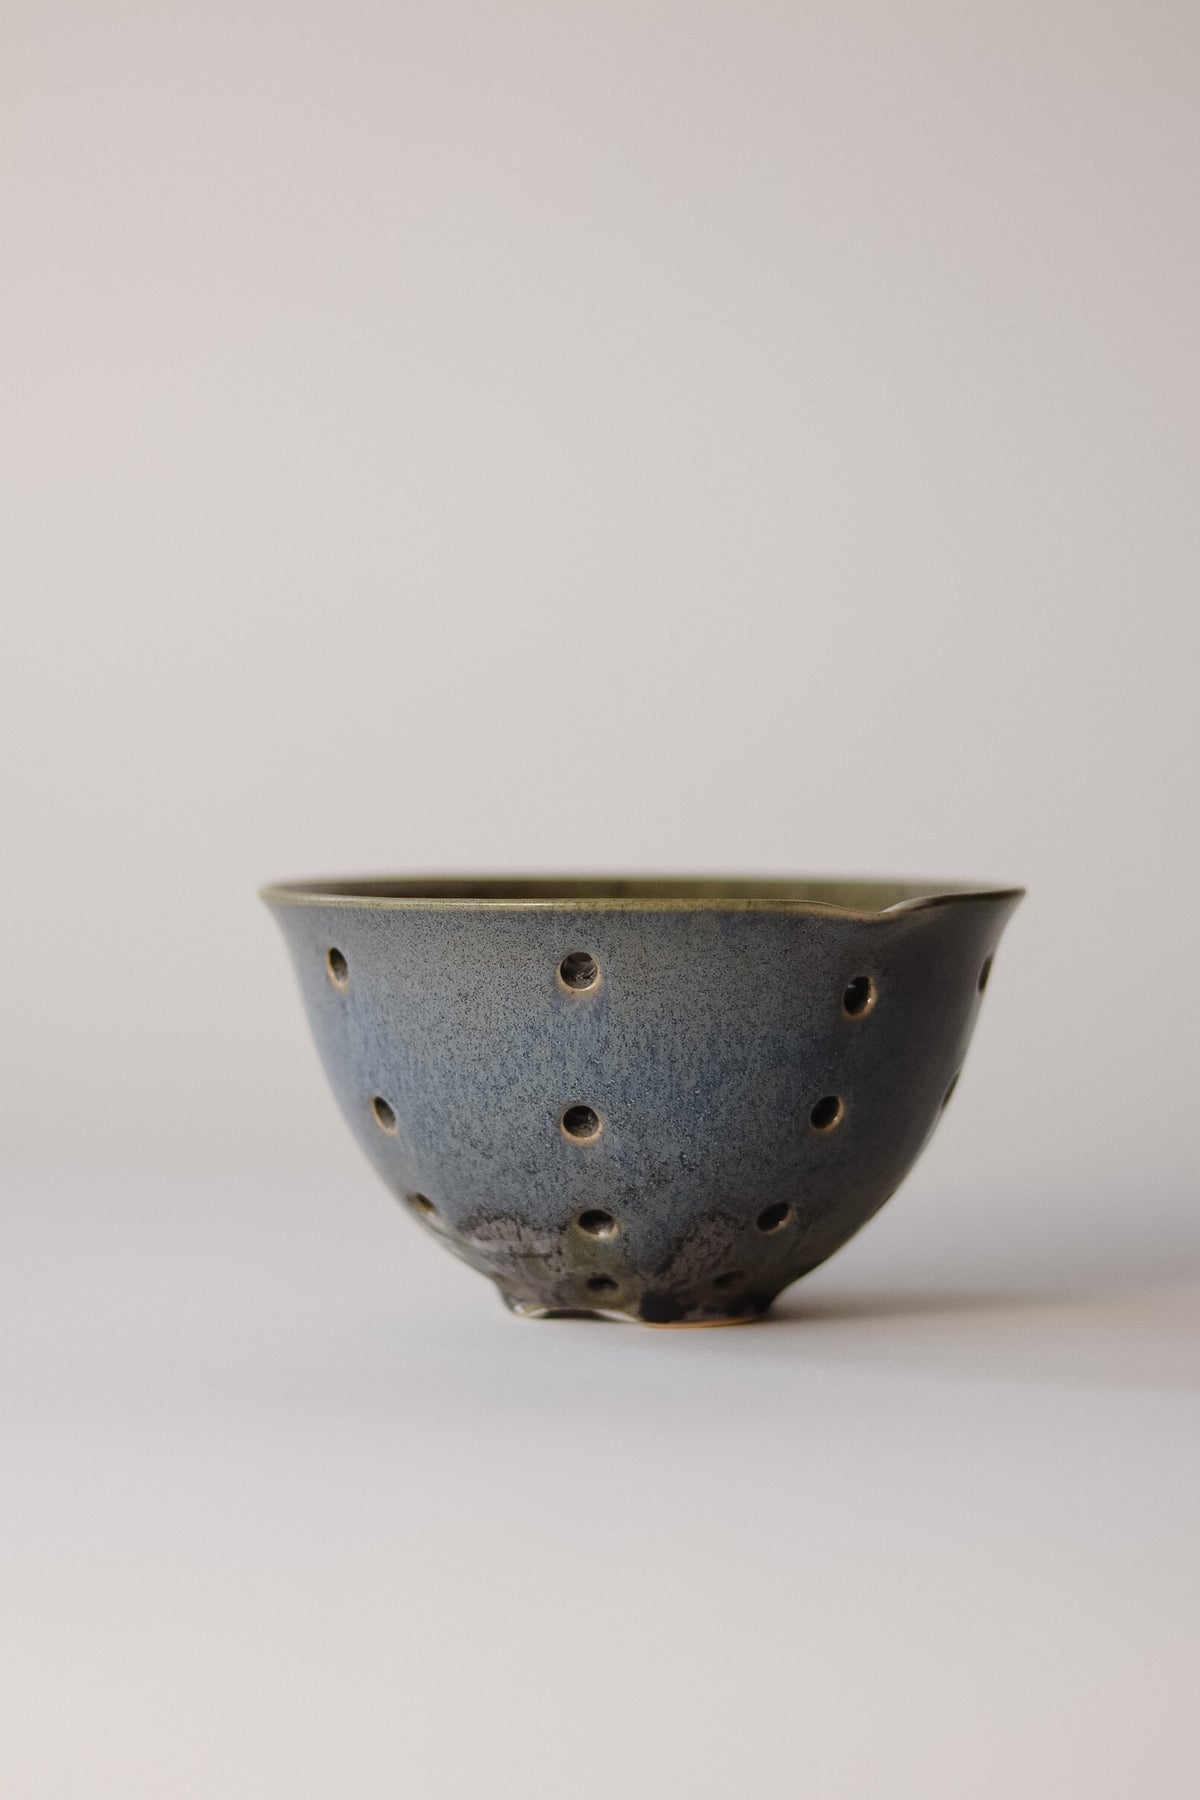 A handcrafted stoneware bowl with a speckled glaze, perfect for displaying seasonal berries.